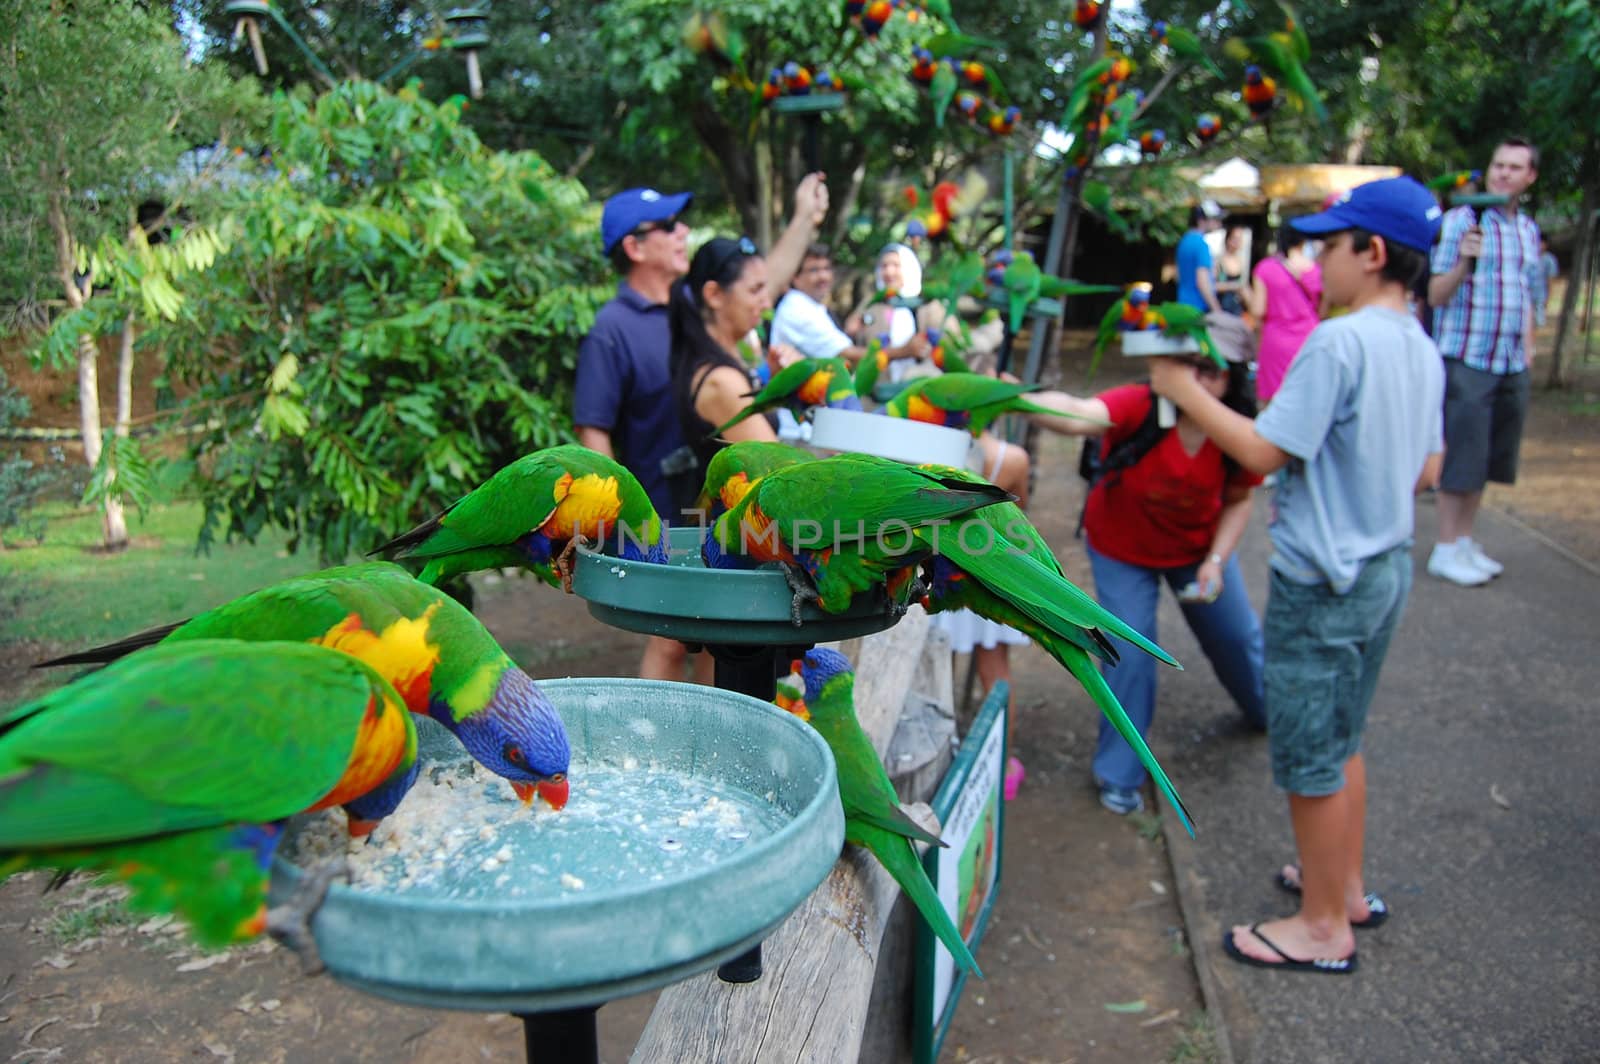 Green parrots in zoo by danemo